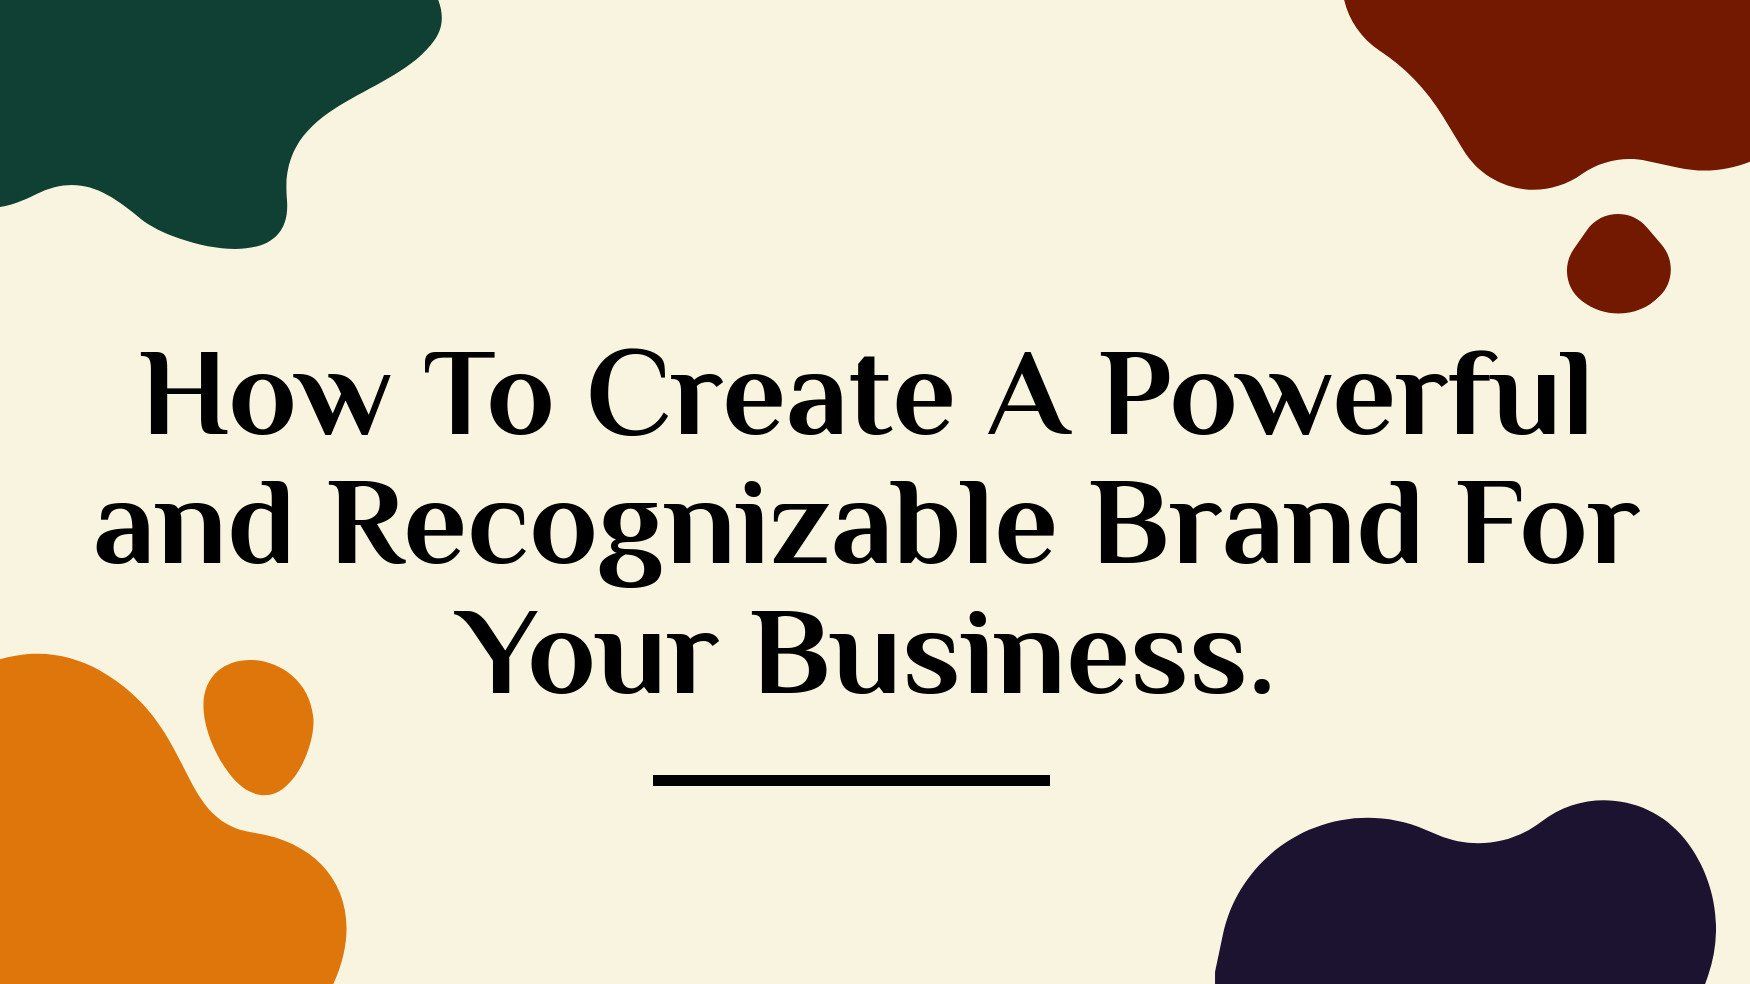 How To Create A Powerful and Recognizable Brand For Your Business.